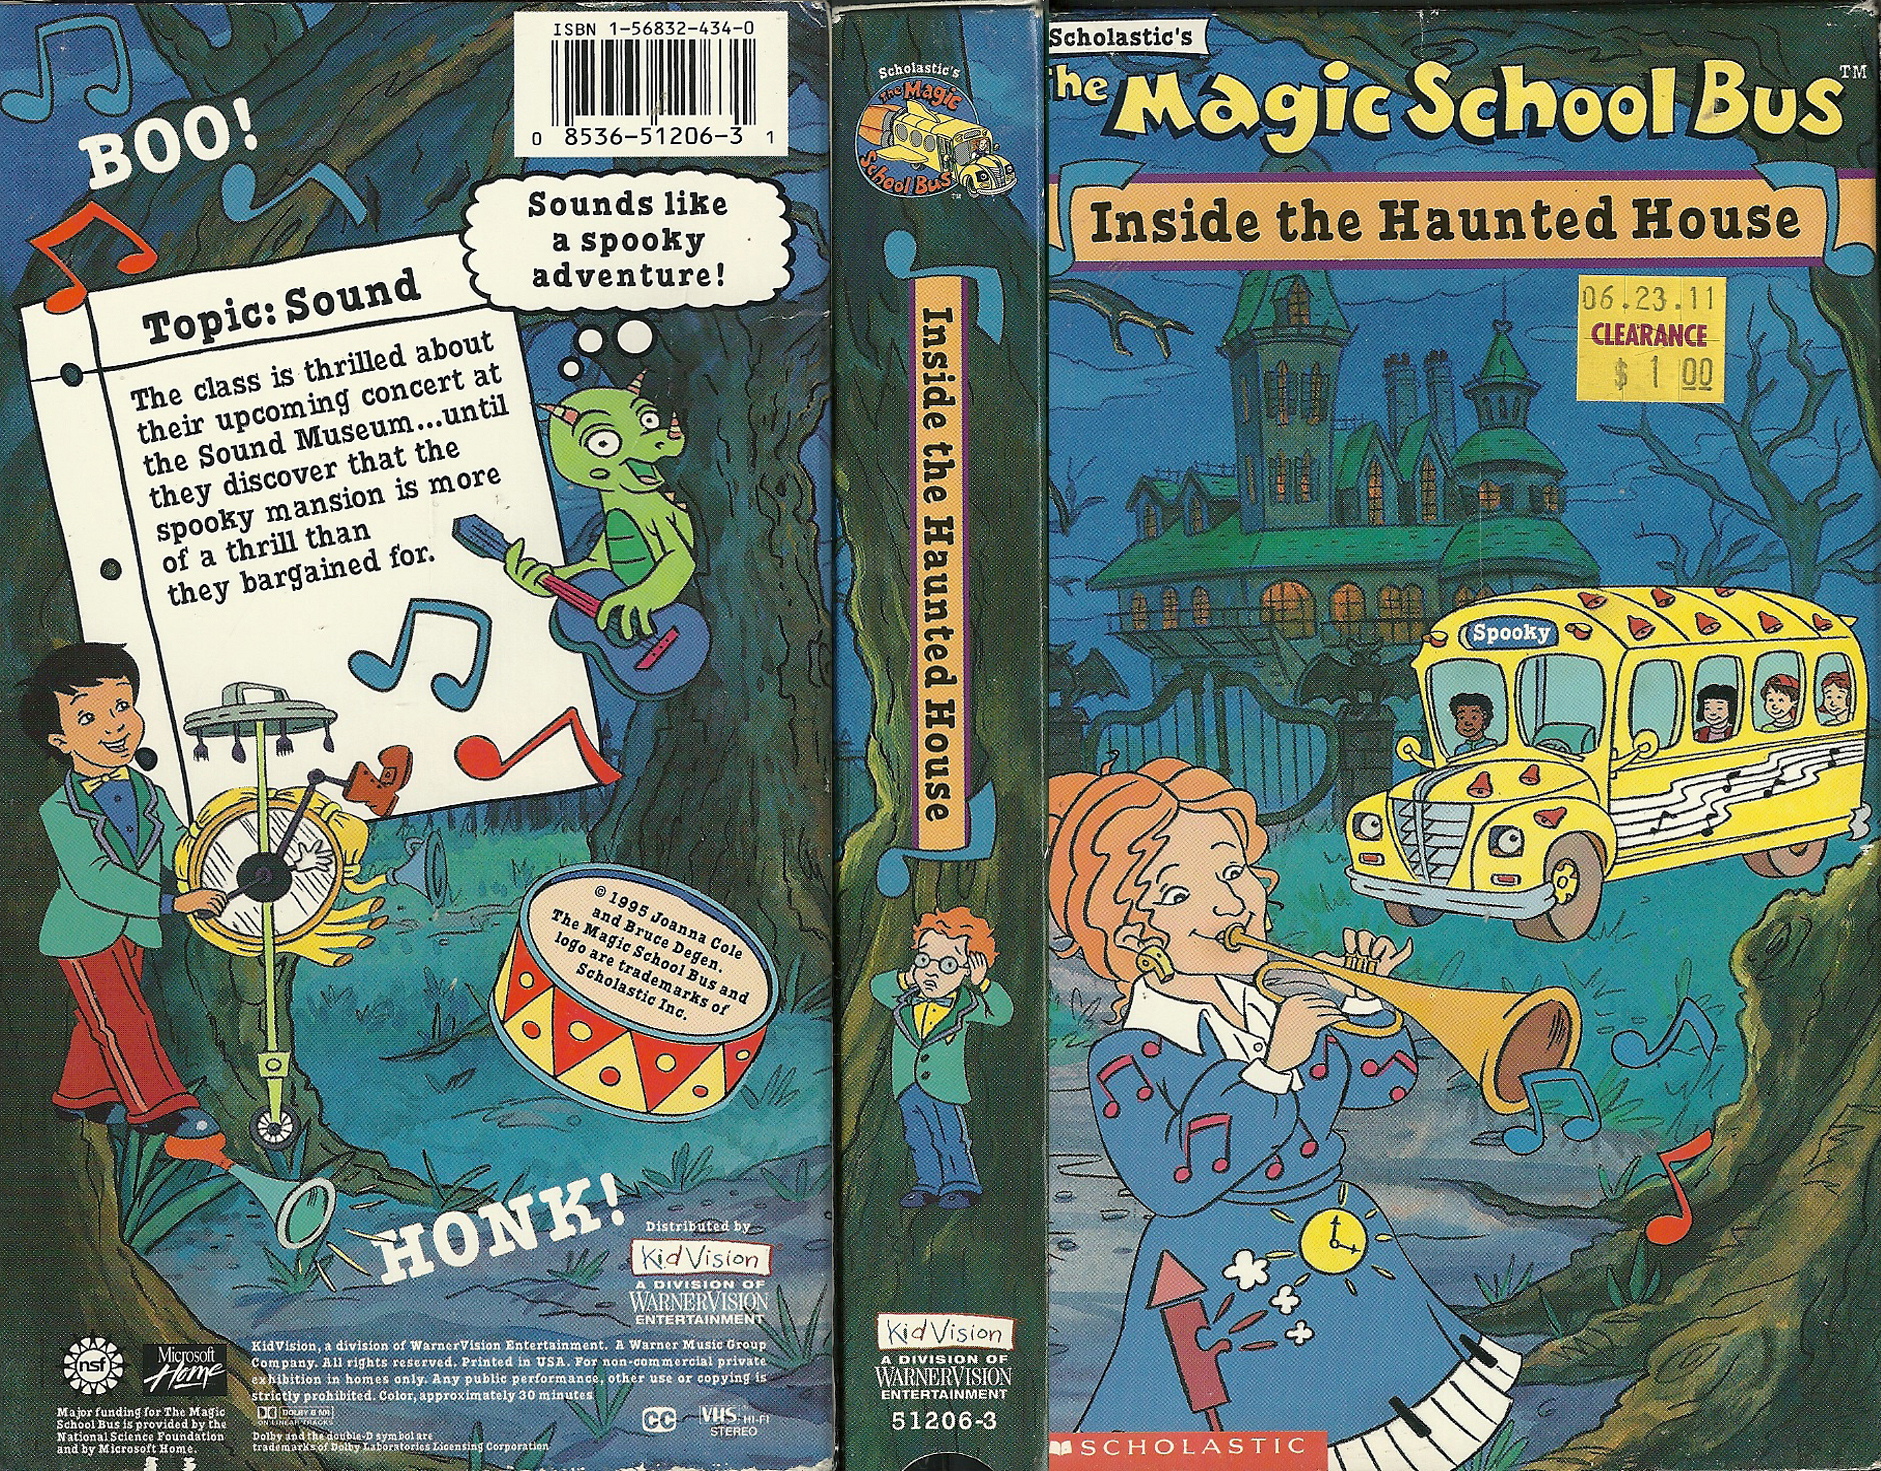 The Magic School Bus - Inside the Haunted House movie